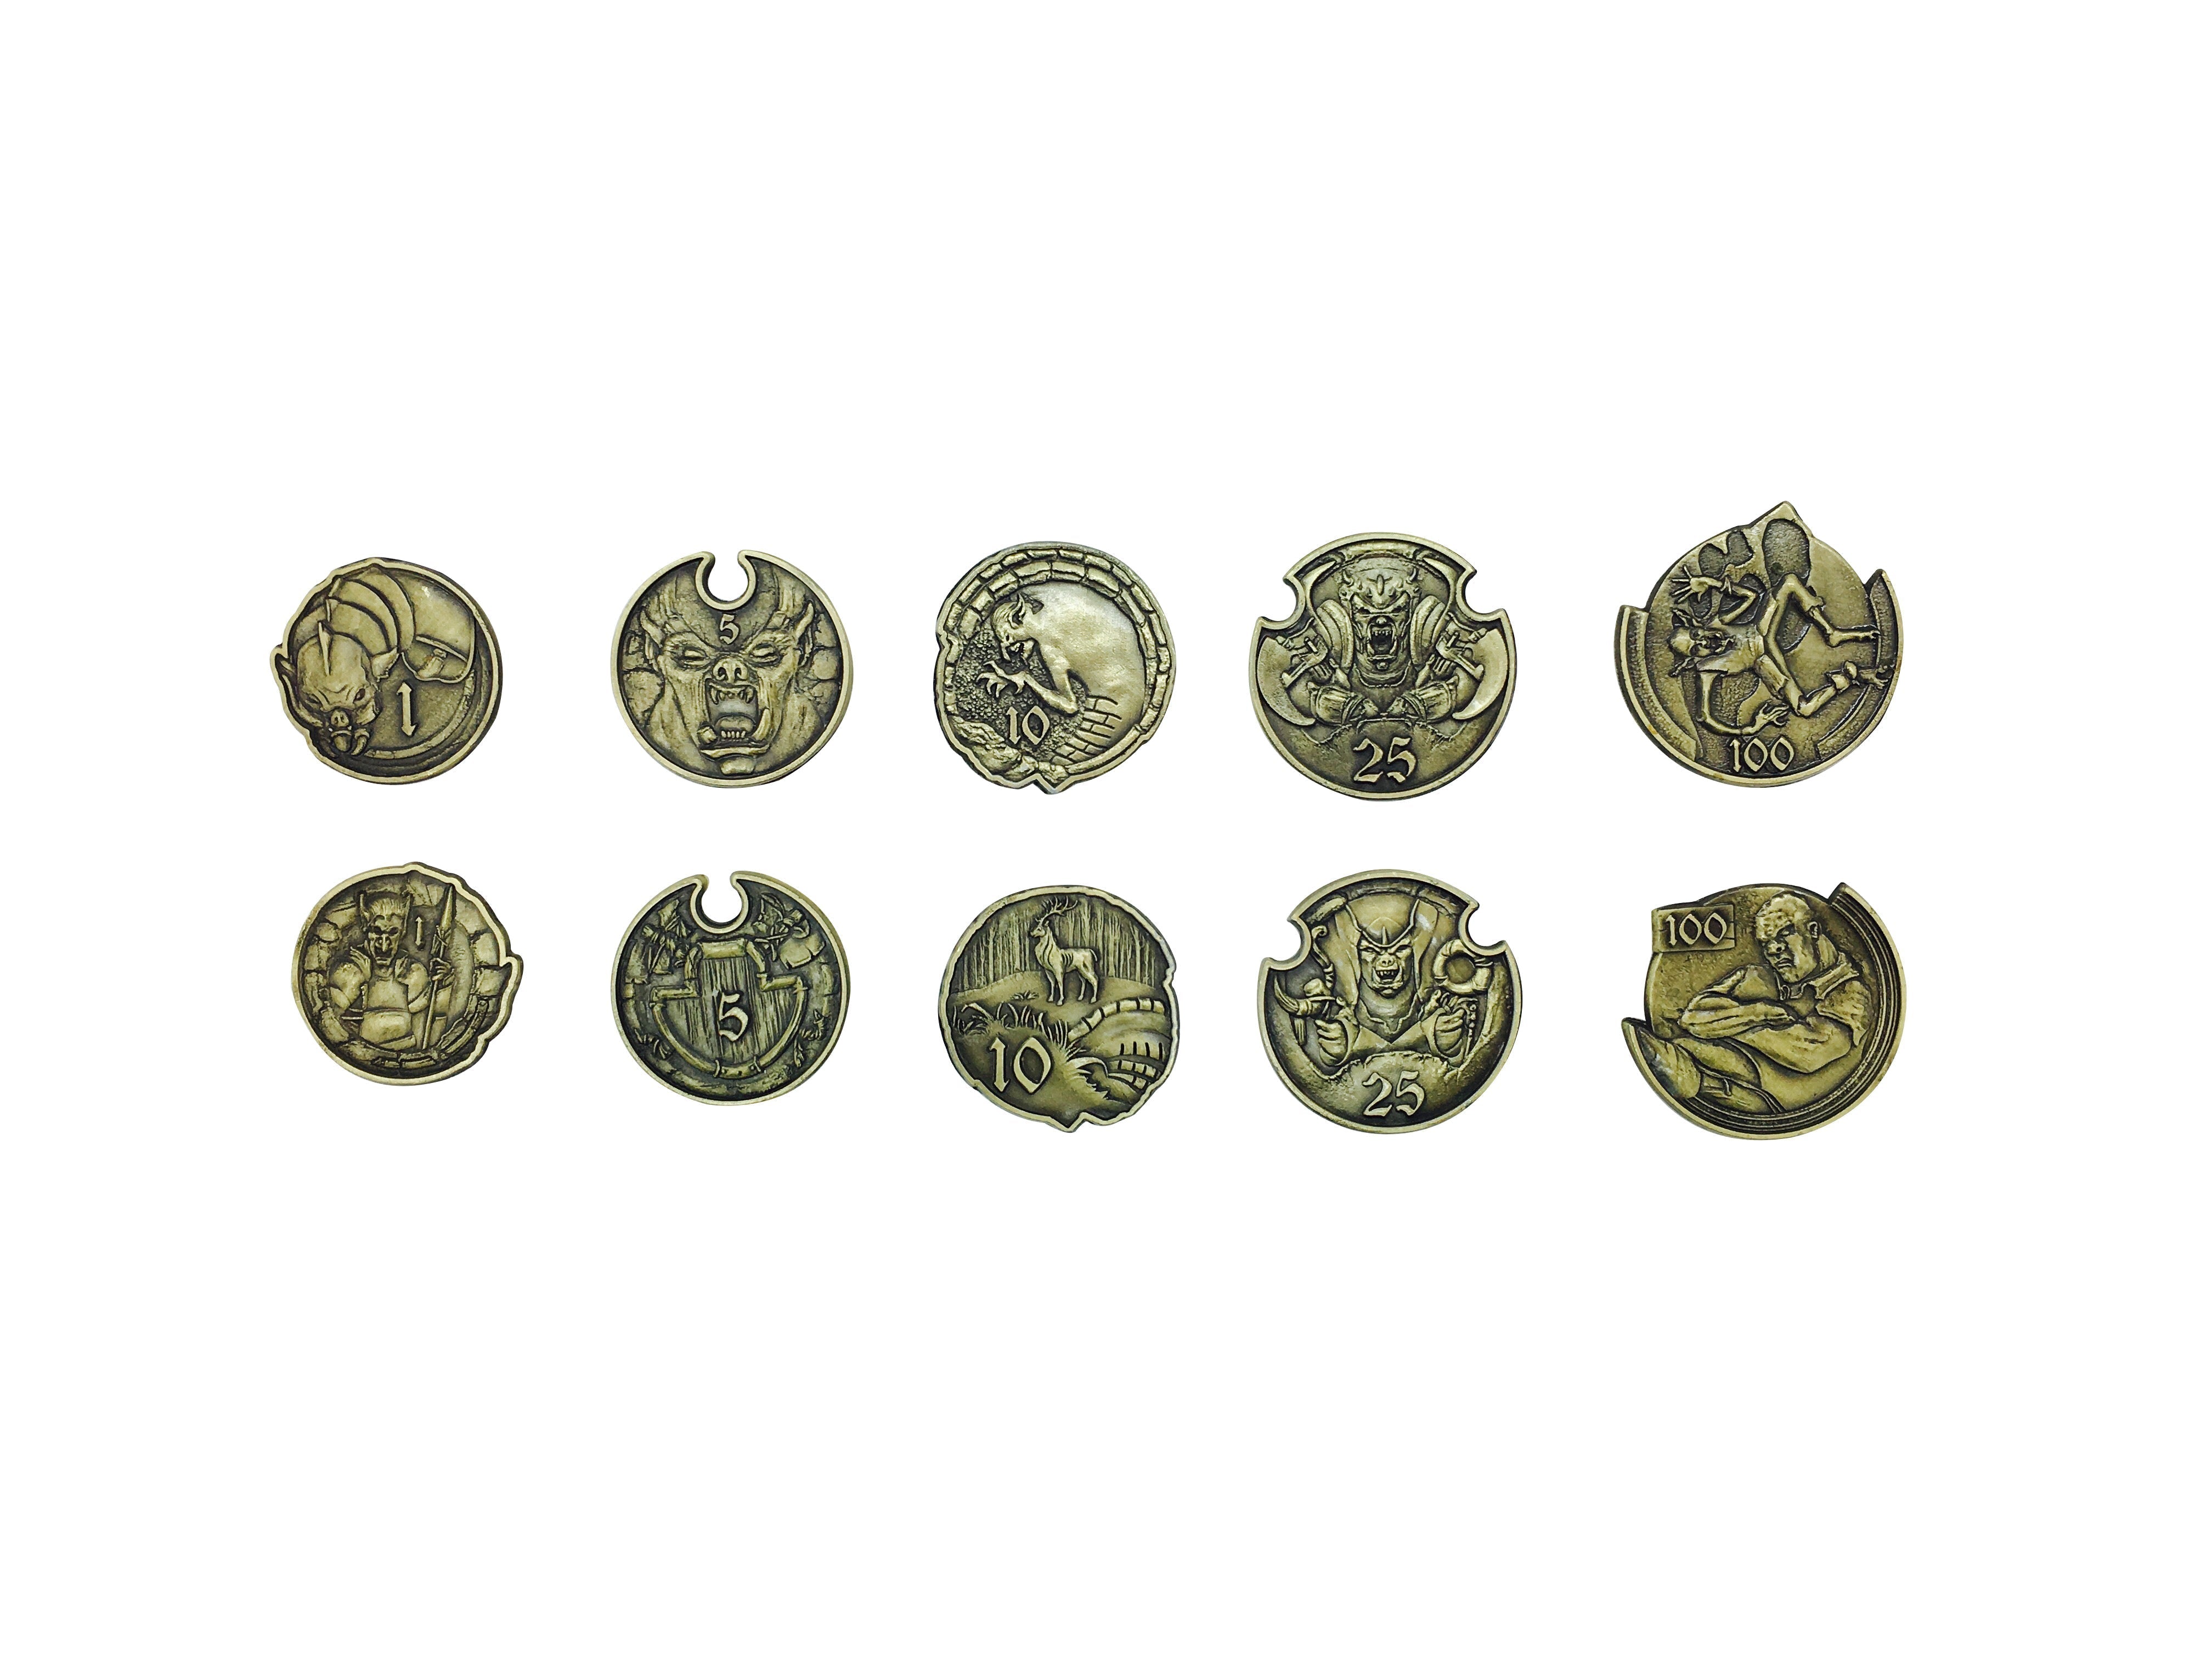 Adventure Coins – Orc and Goblins Metal Coins Set of 10 - NOR 03446_Parent